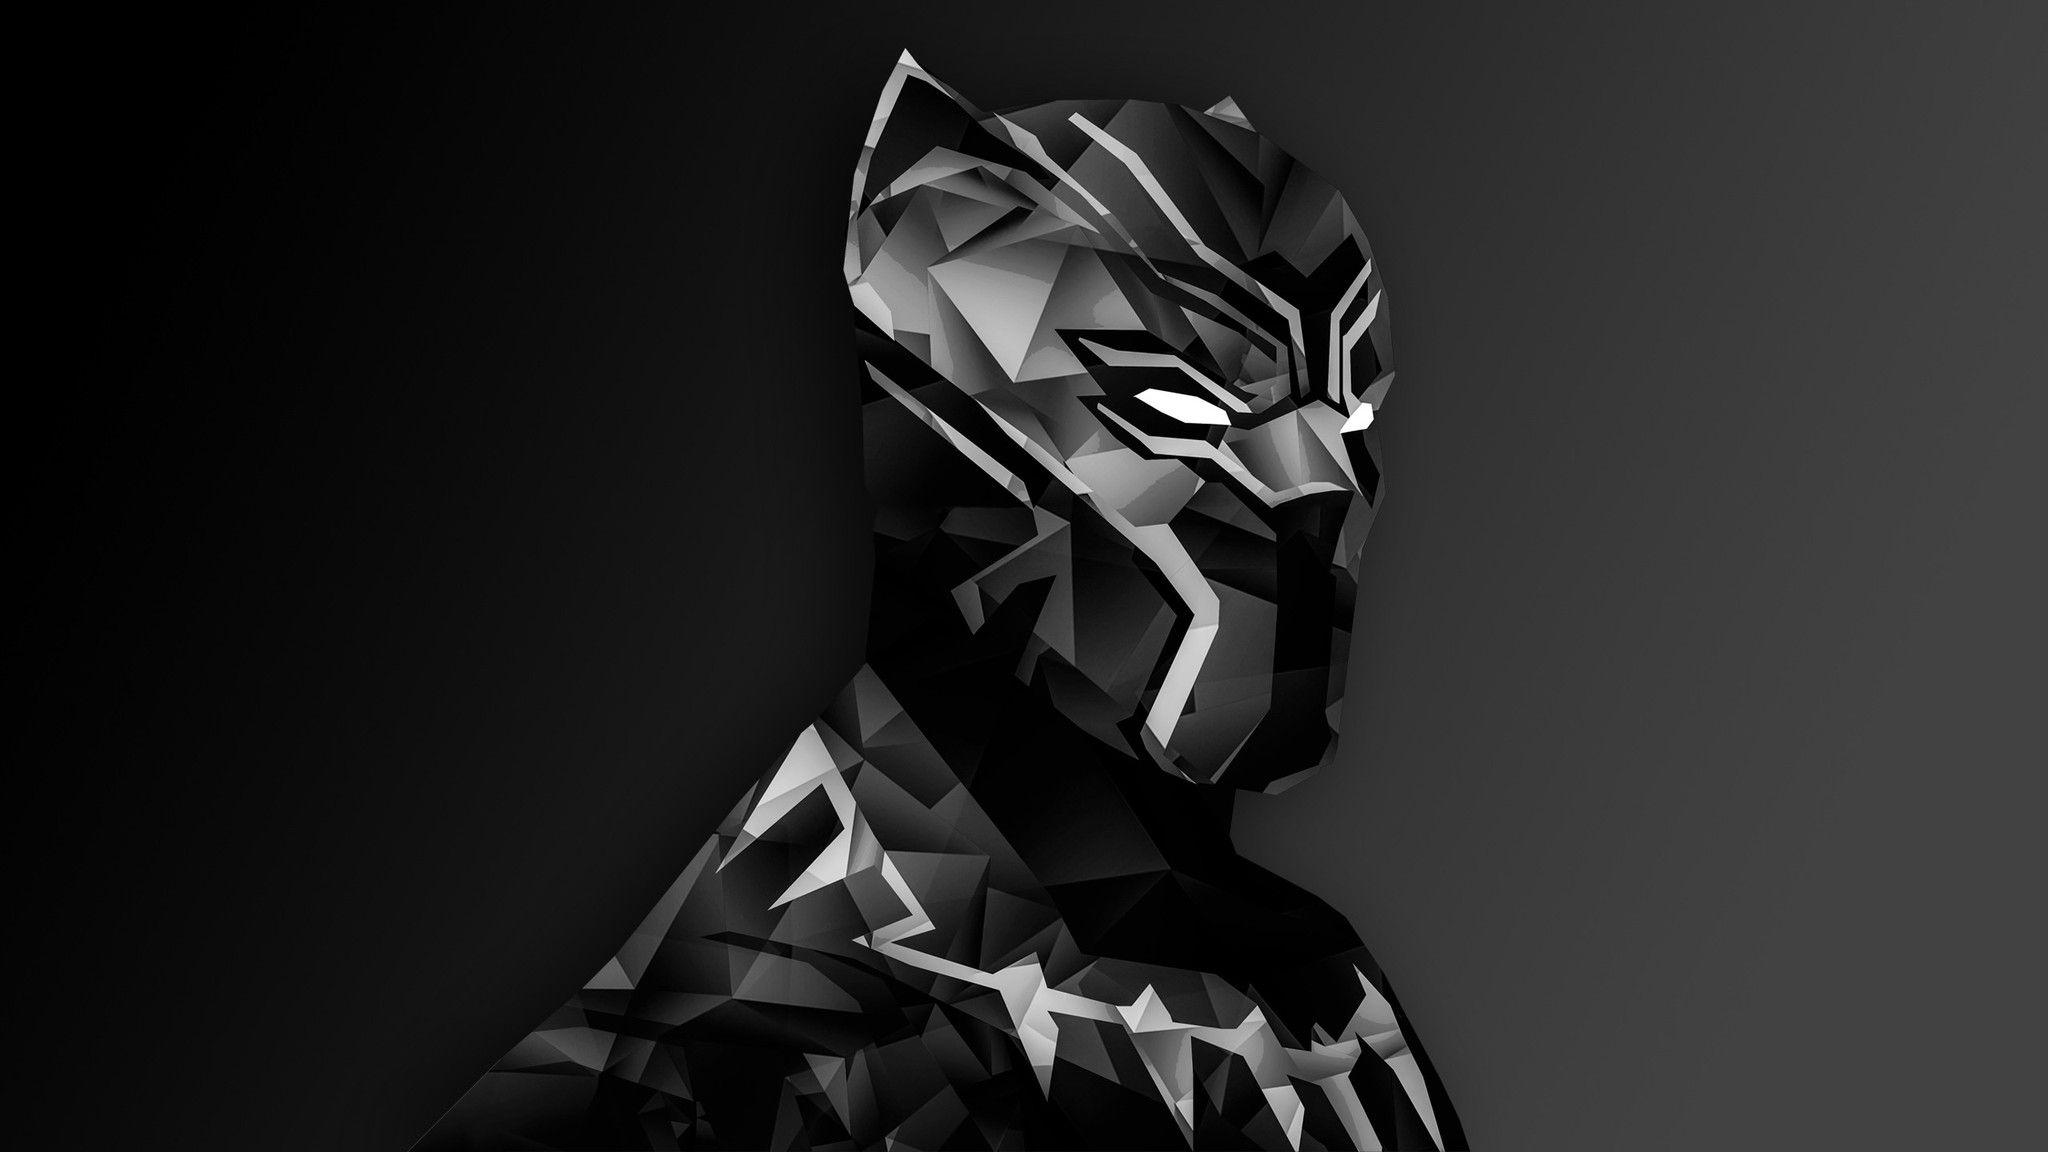 Black Panther Marvel Wallpapers - Wallpaper Cave